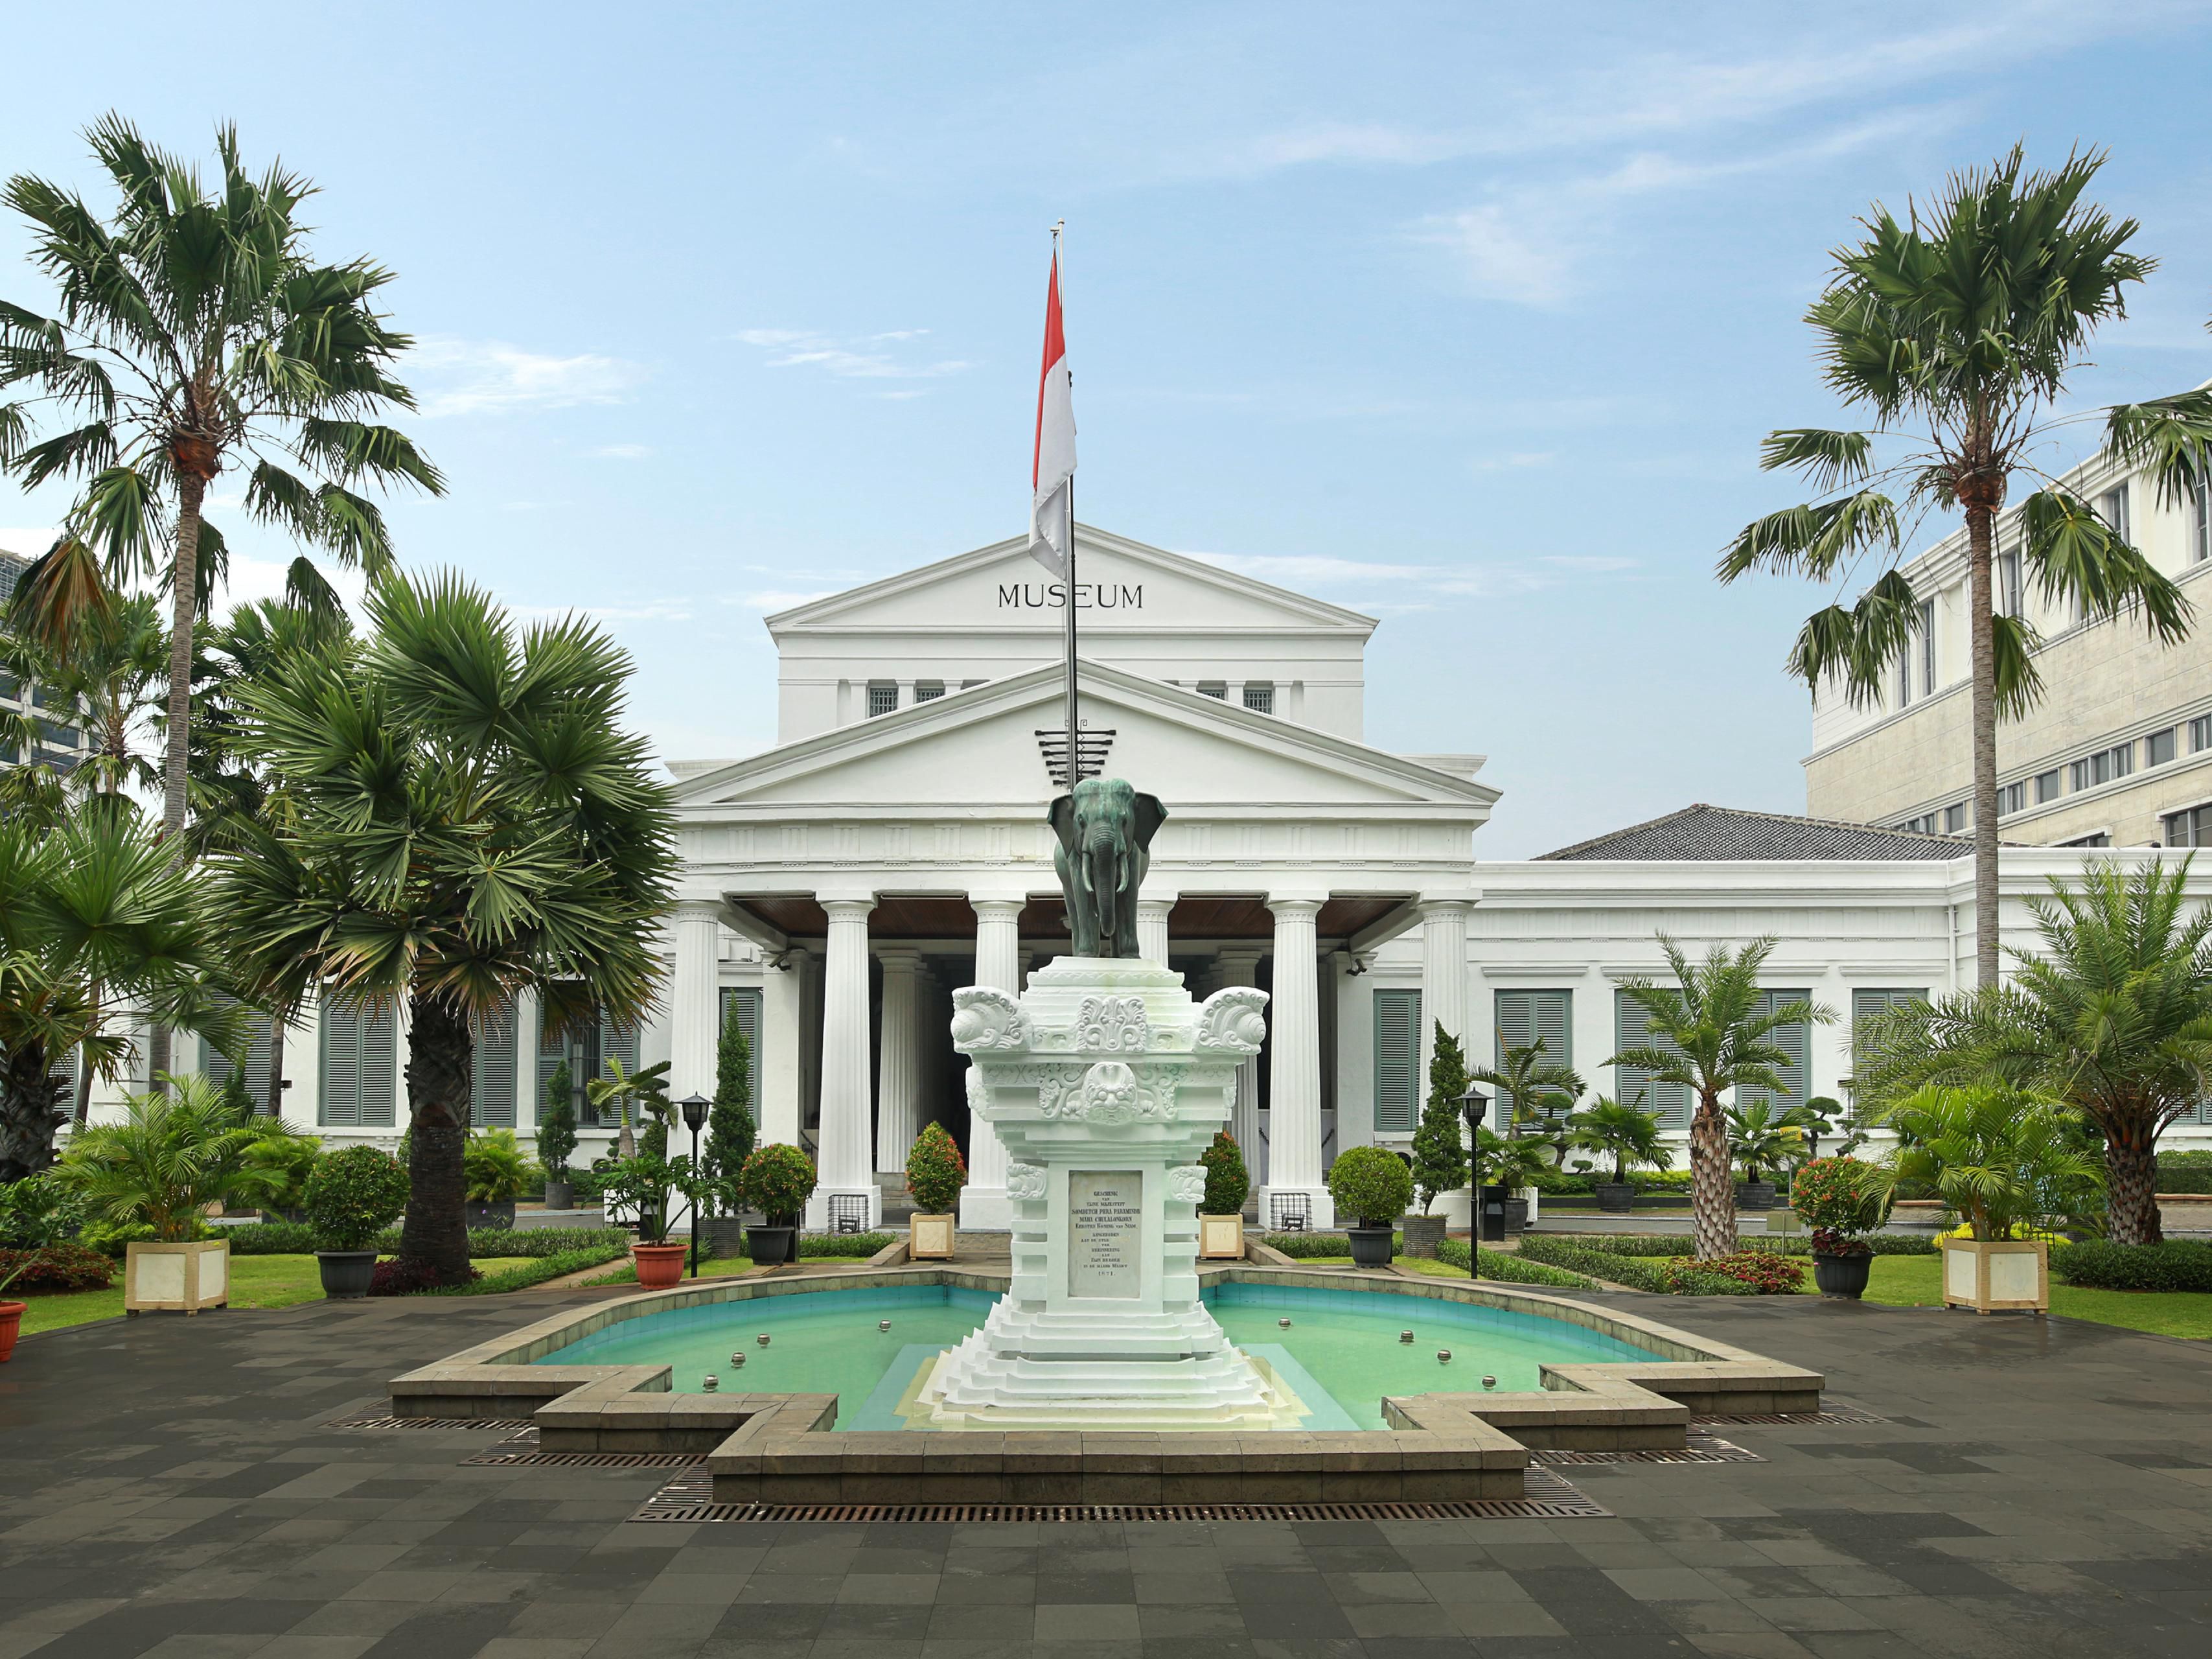 Museum Nasional, only 3.7 km away from our hotel